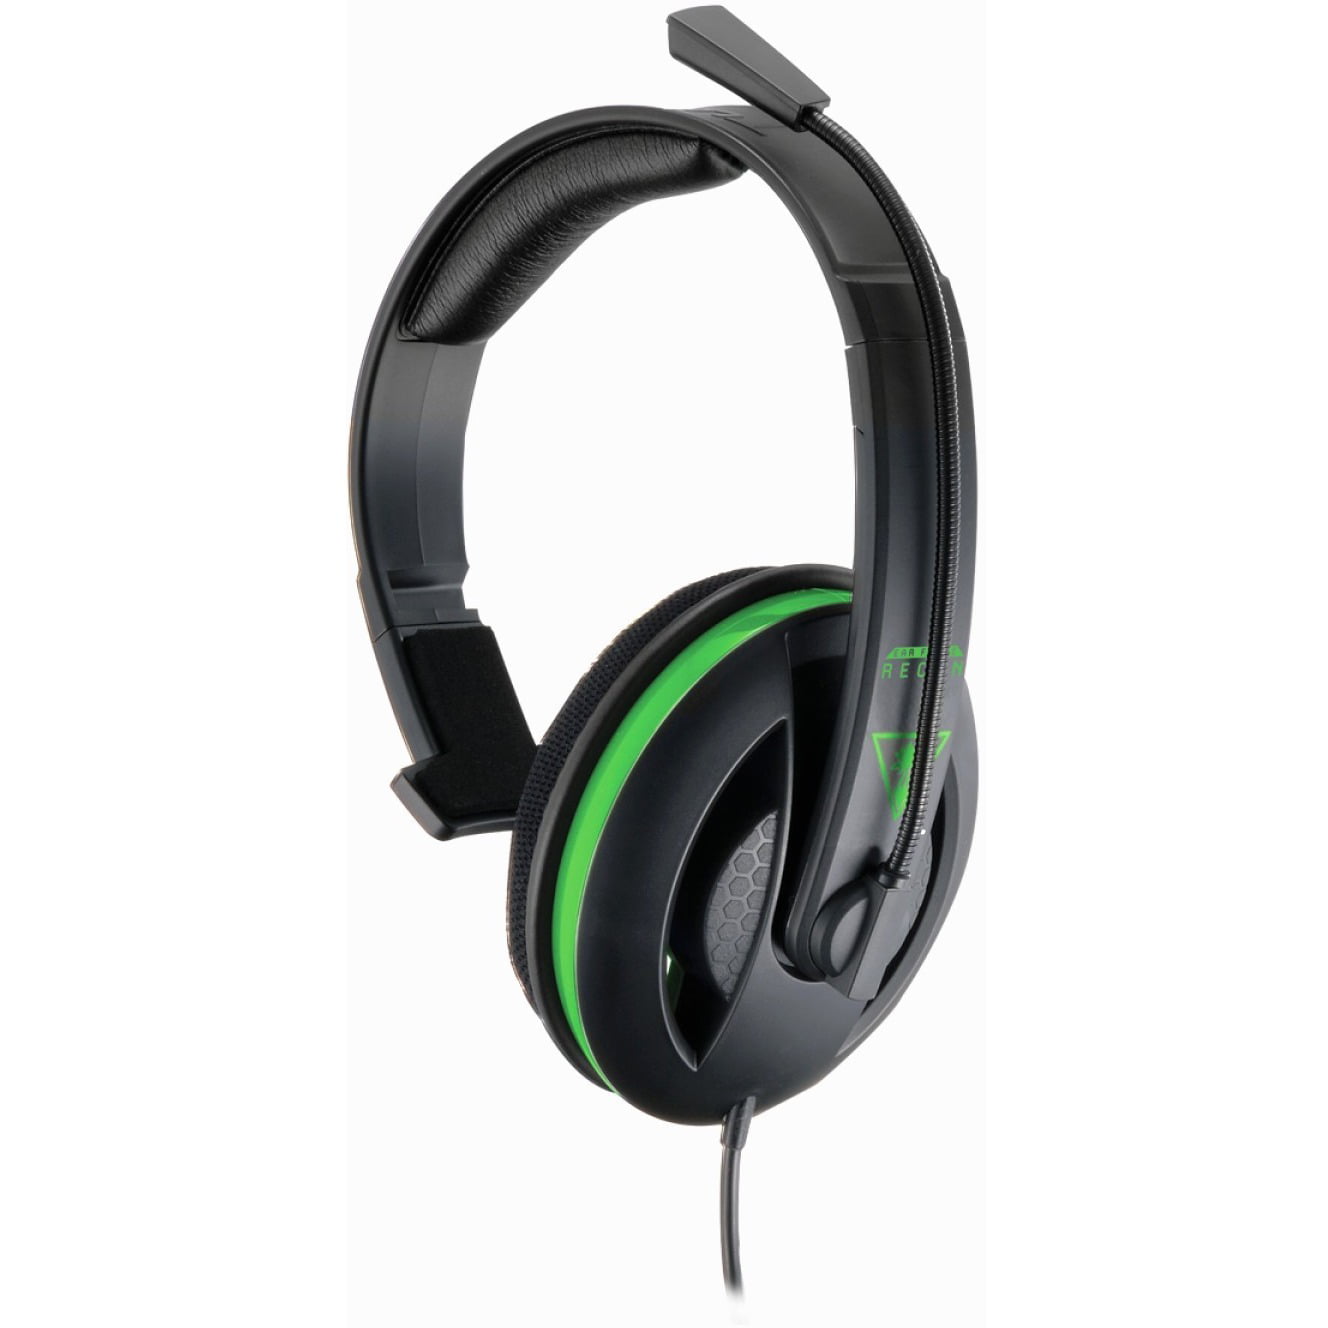 Simple Setting Up Recon Chat Headset Xbox One for Streamer